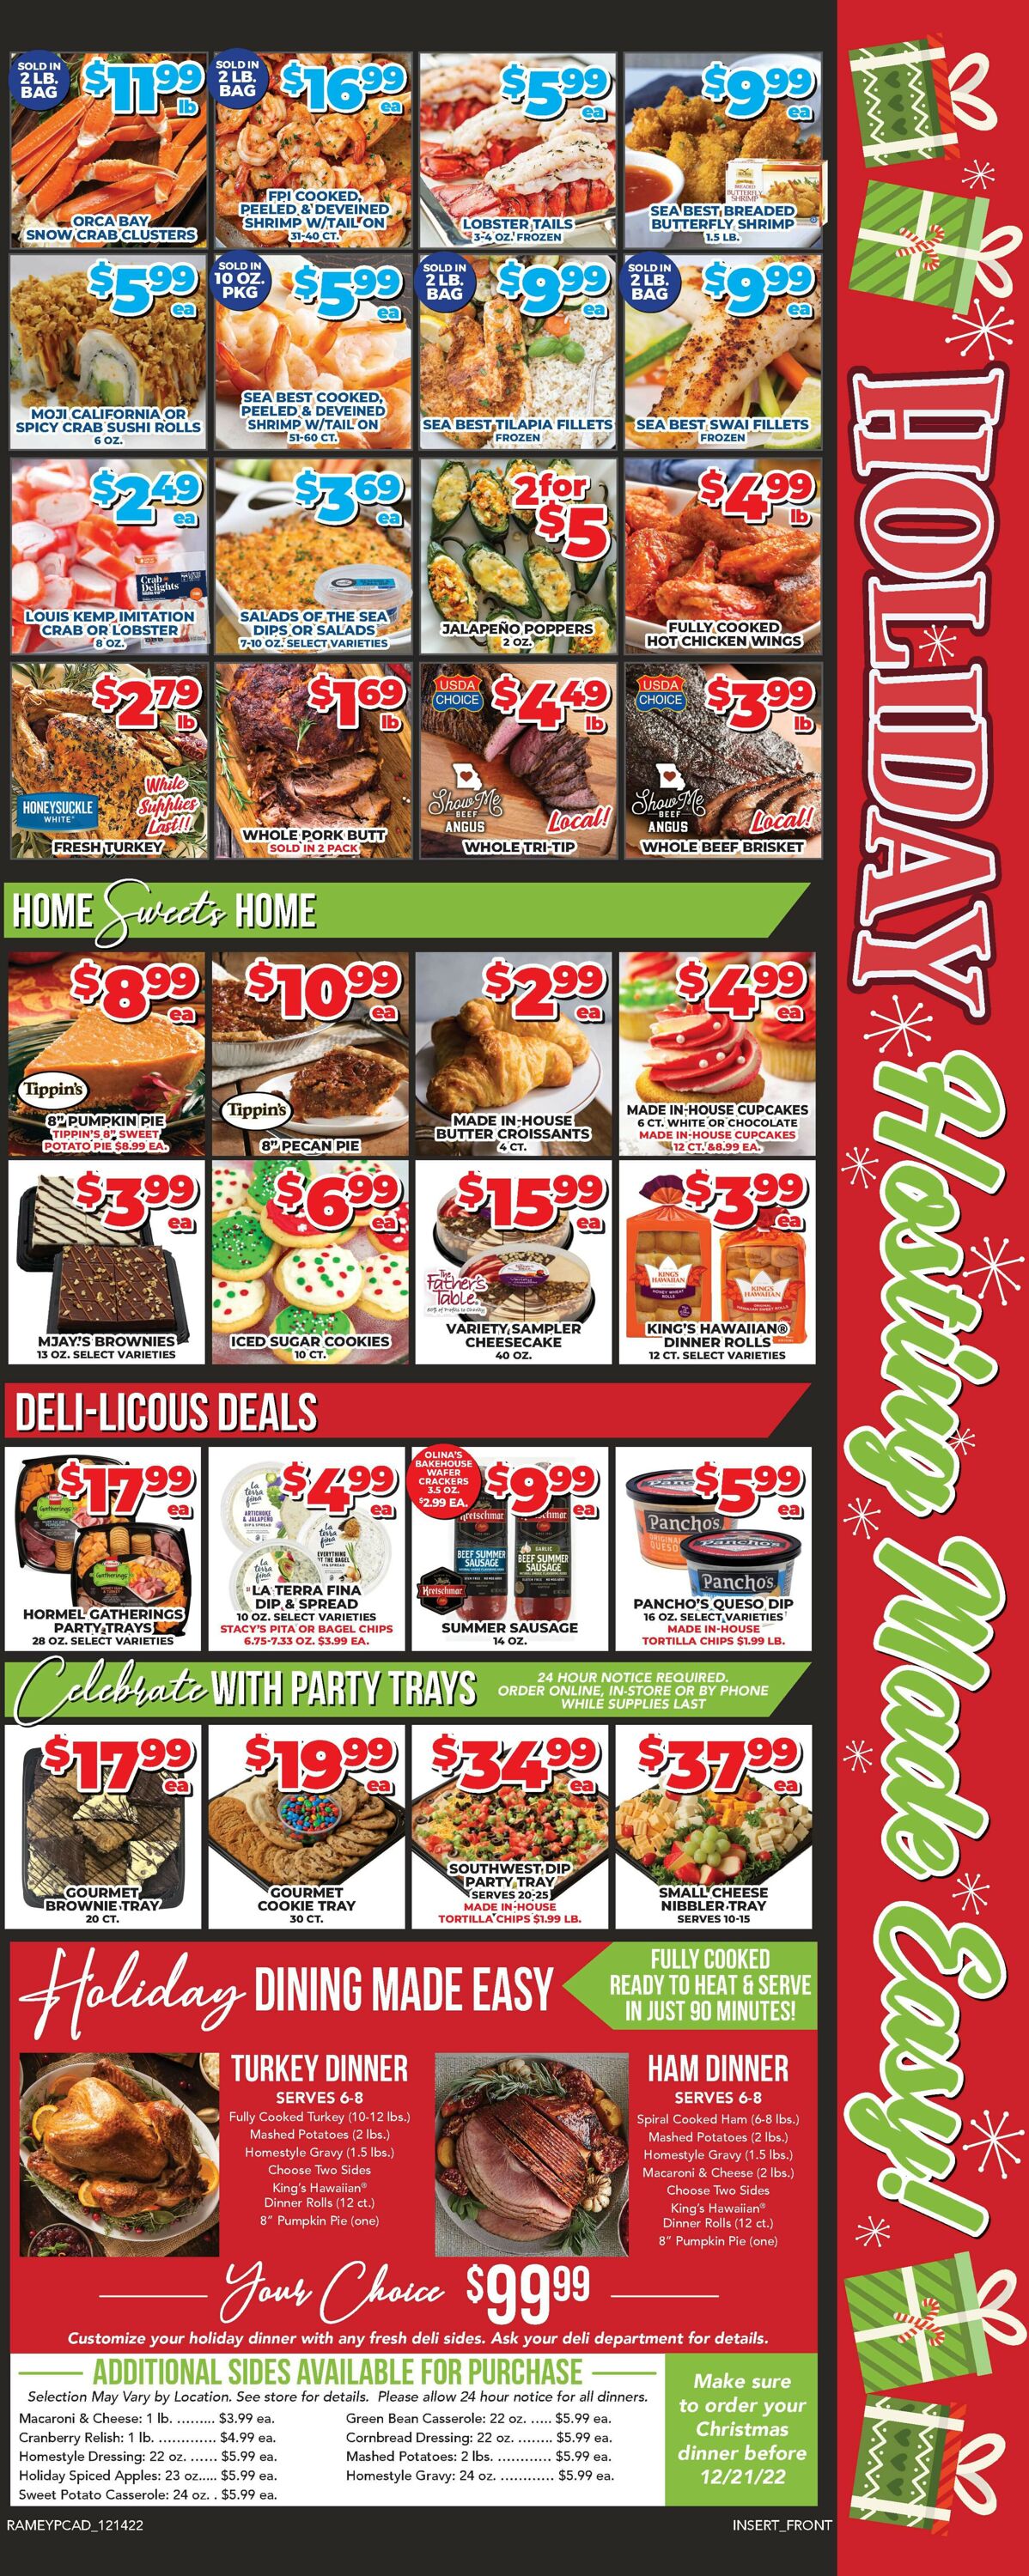 Price Cutter Weekly Ad Circular - valid 12/14-12/20/2022 (Page 3)